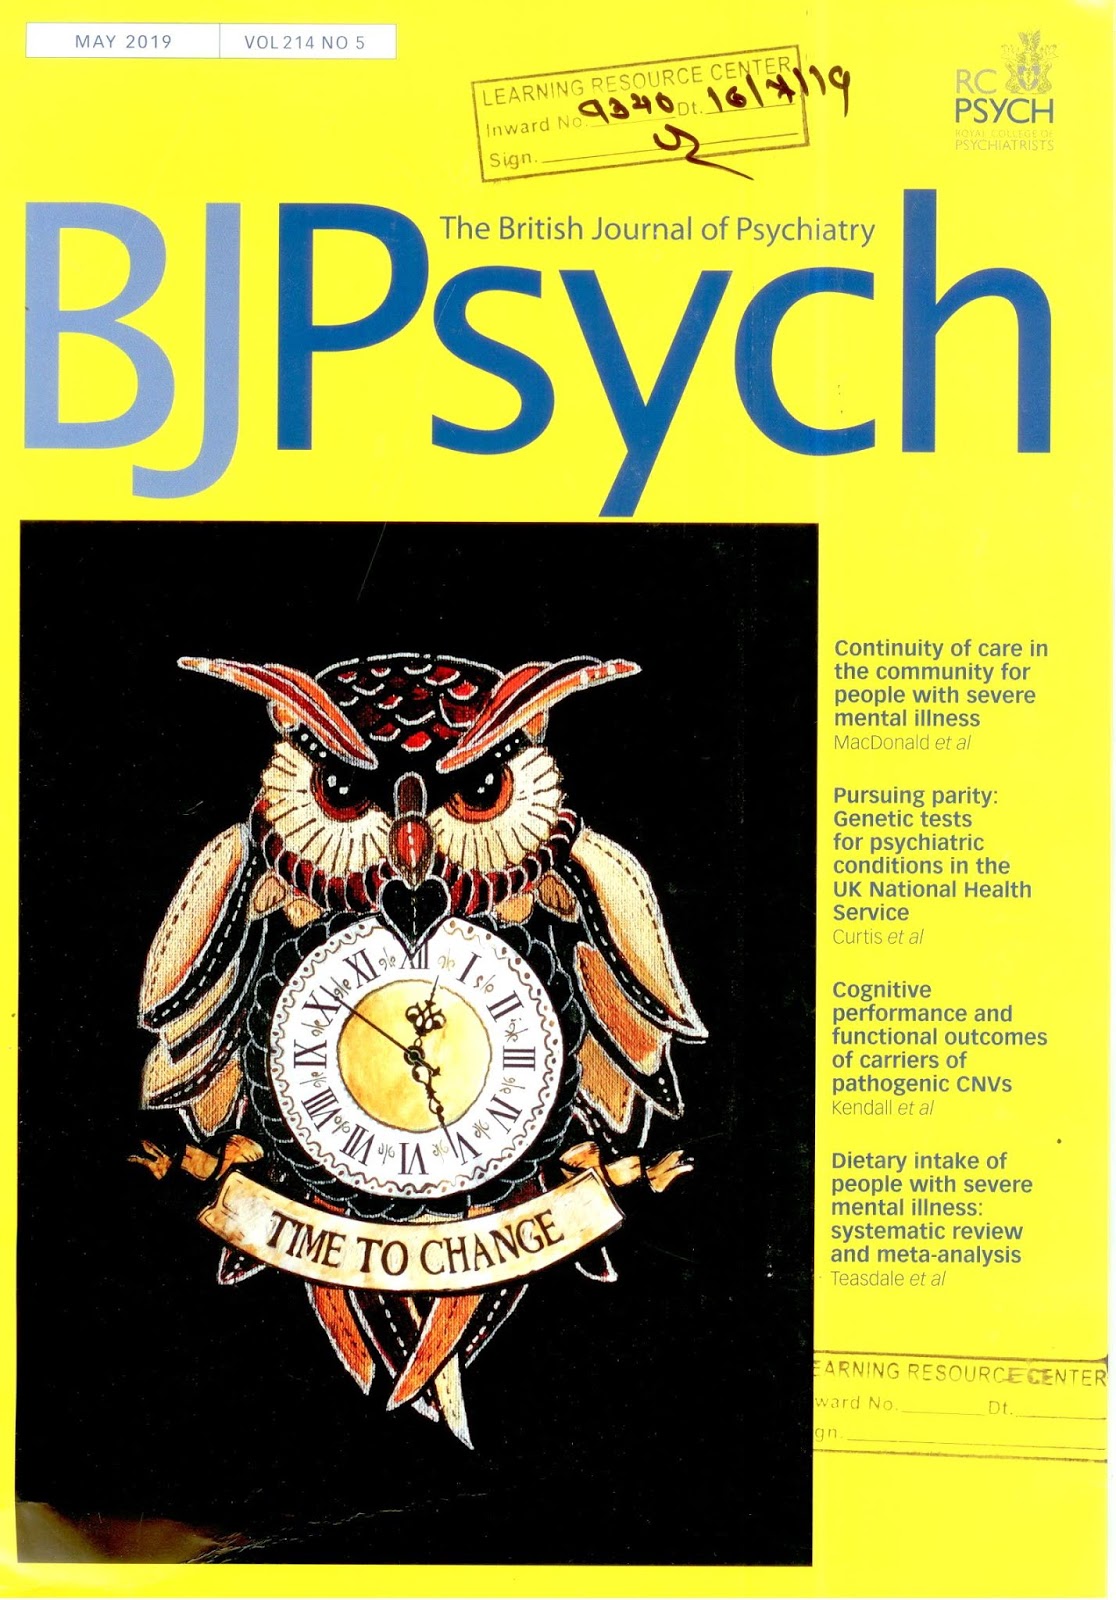 https://www.cambridge.org/core/journals/the-british-journal-of-psychiatry/issue/8D4F3CC86FD720213F8A1BD80BDB99BD